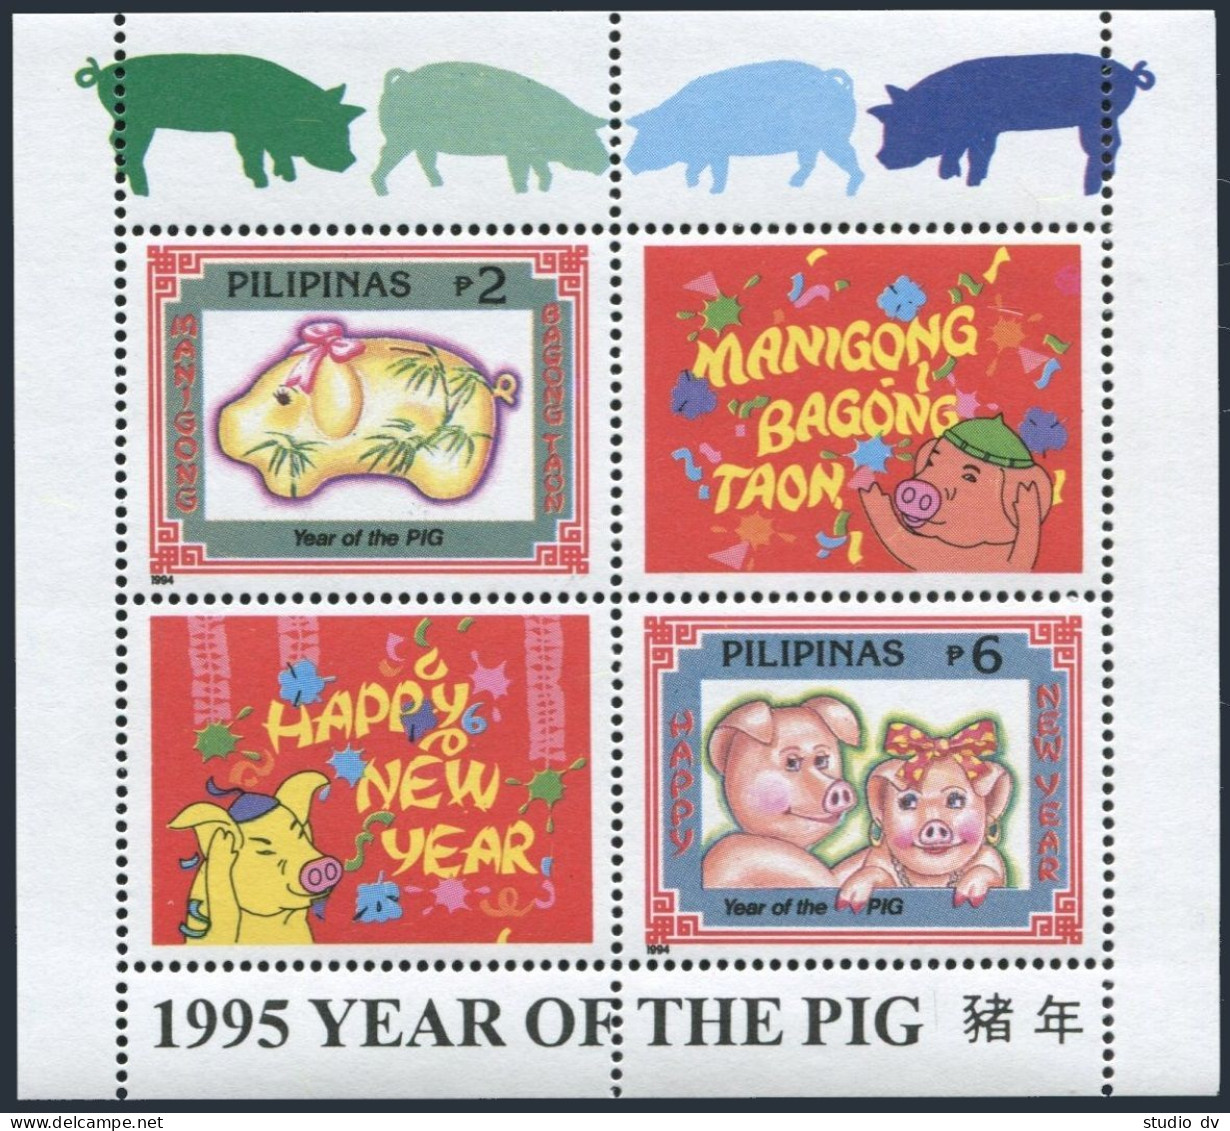 Philippines 2338a, 2338a Imperf, MNH. New Year 1995 - Lunar Year Of The Boar. - Philippines